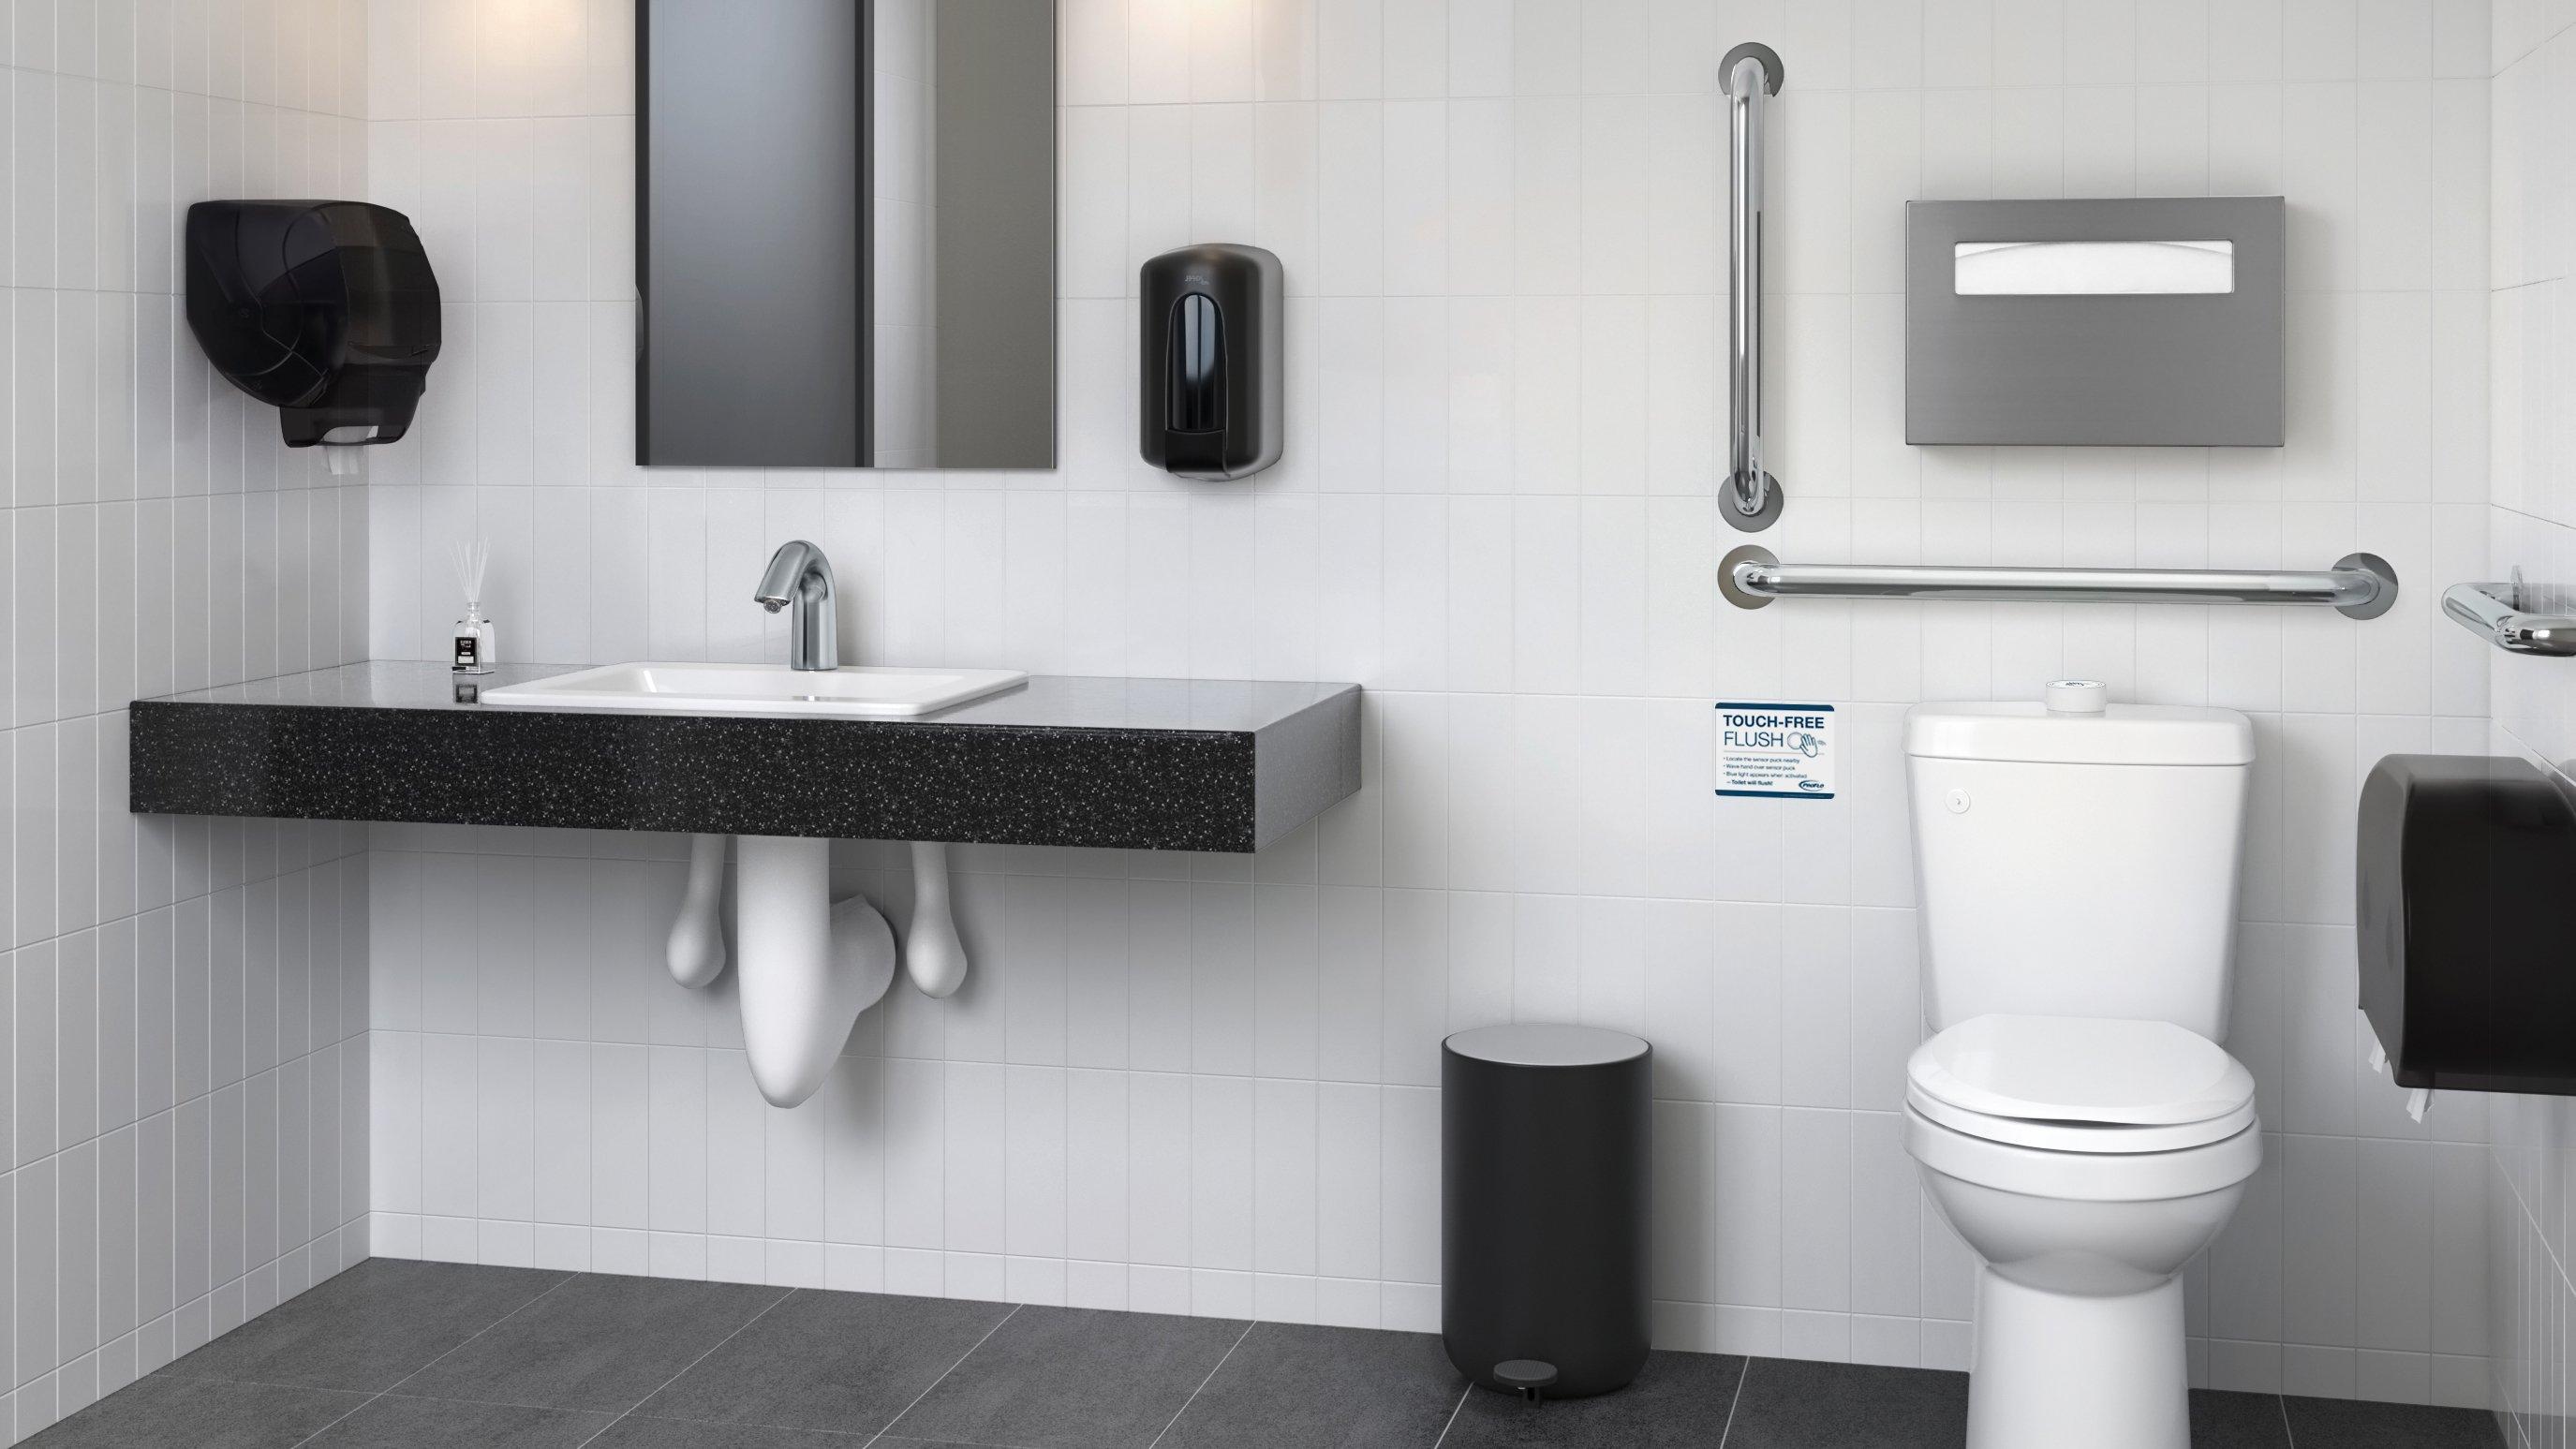 A commercial ADA-compliant single-user restroom, with grab bars, automatic soap and paper towel dispenser, and touchless faucet.